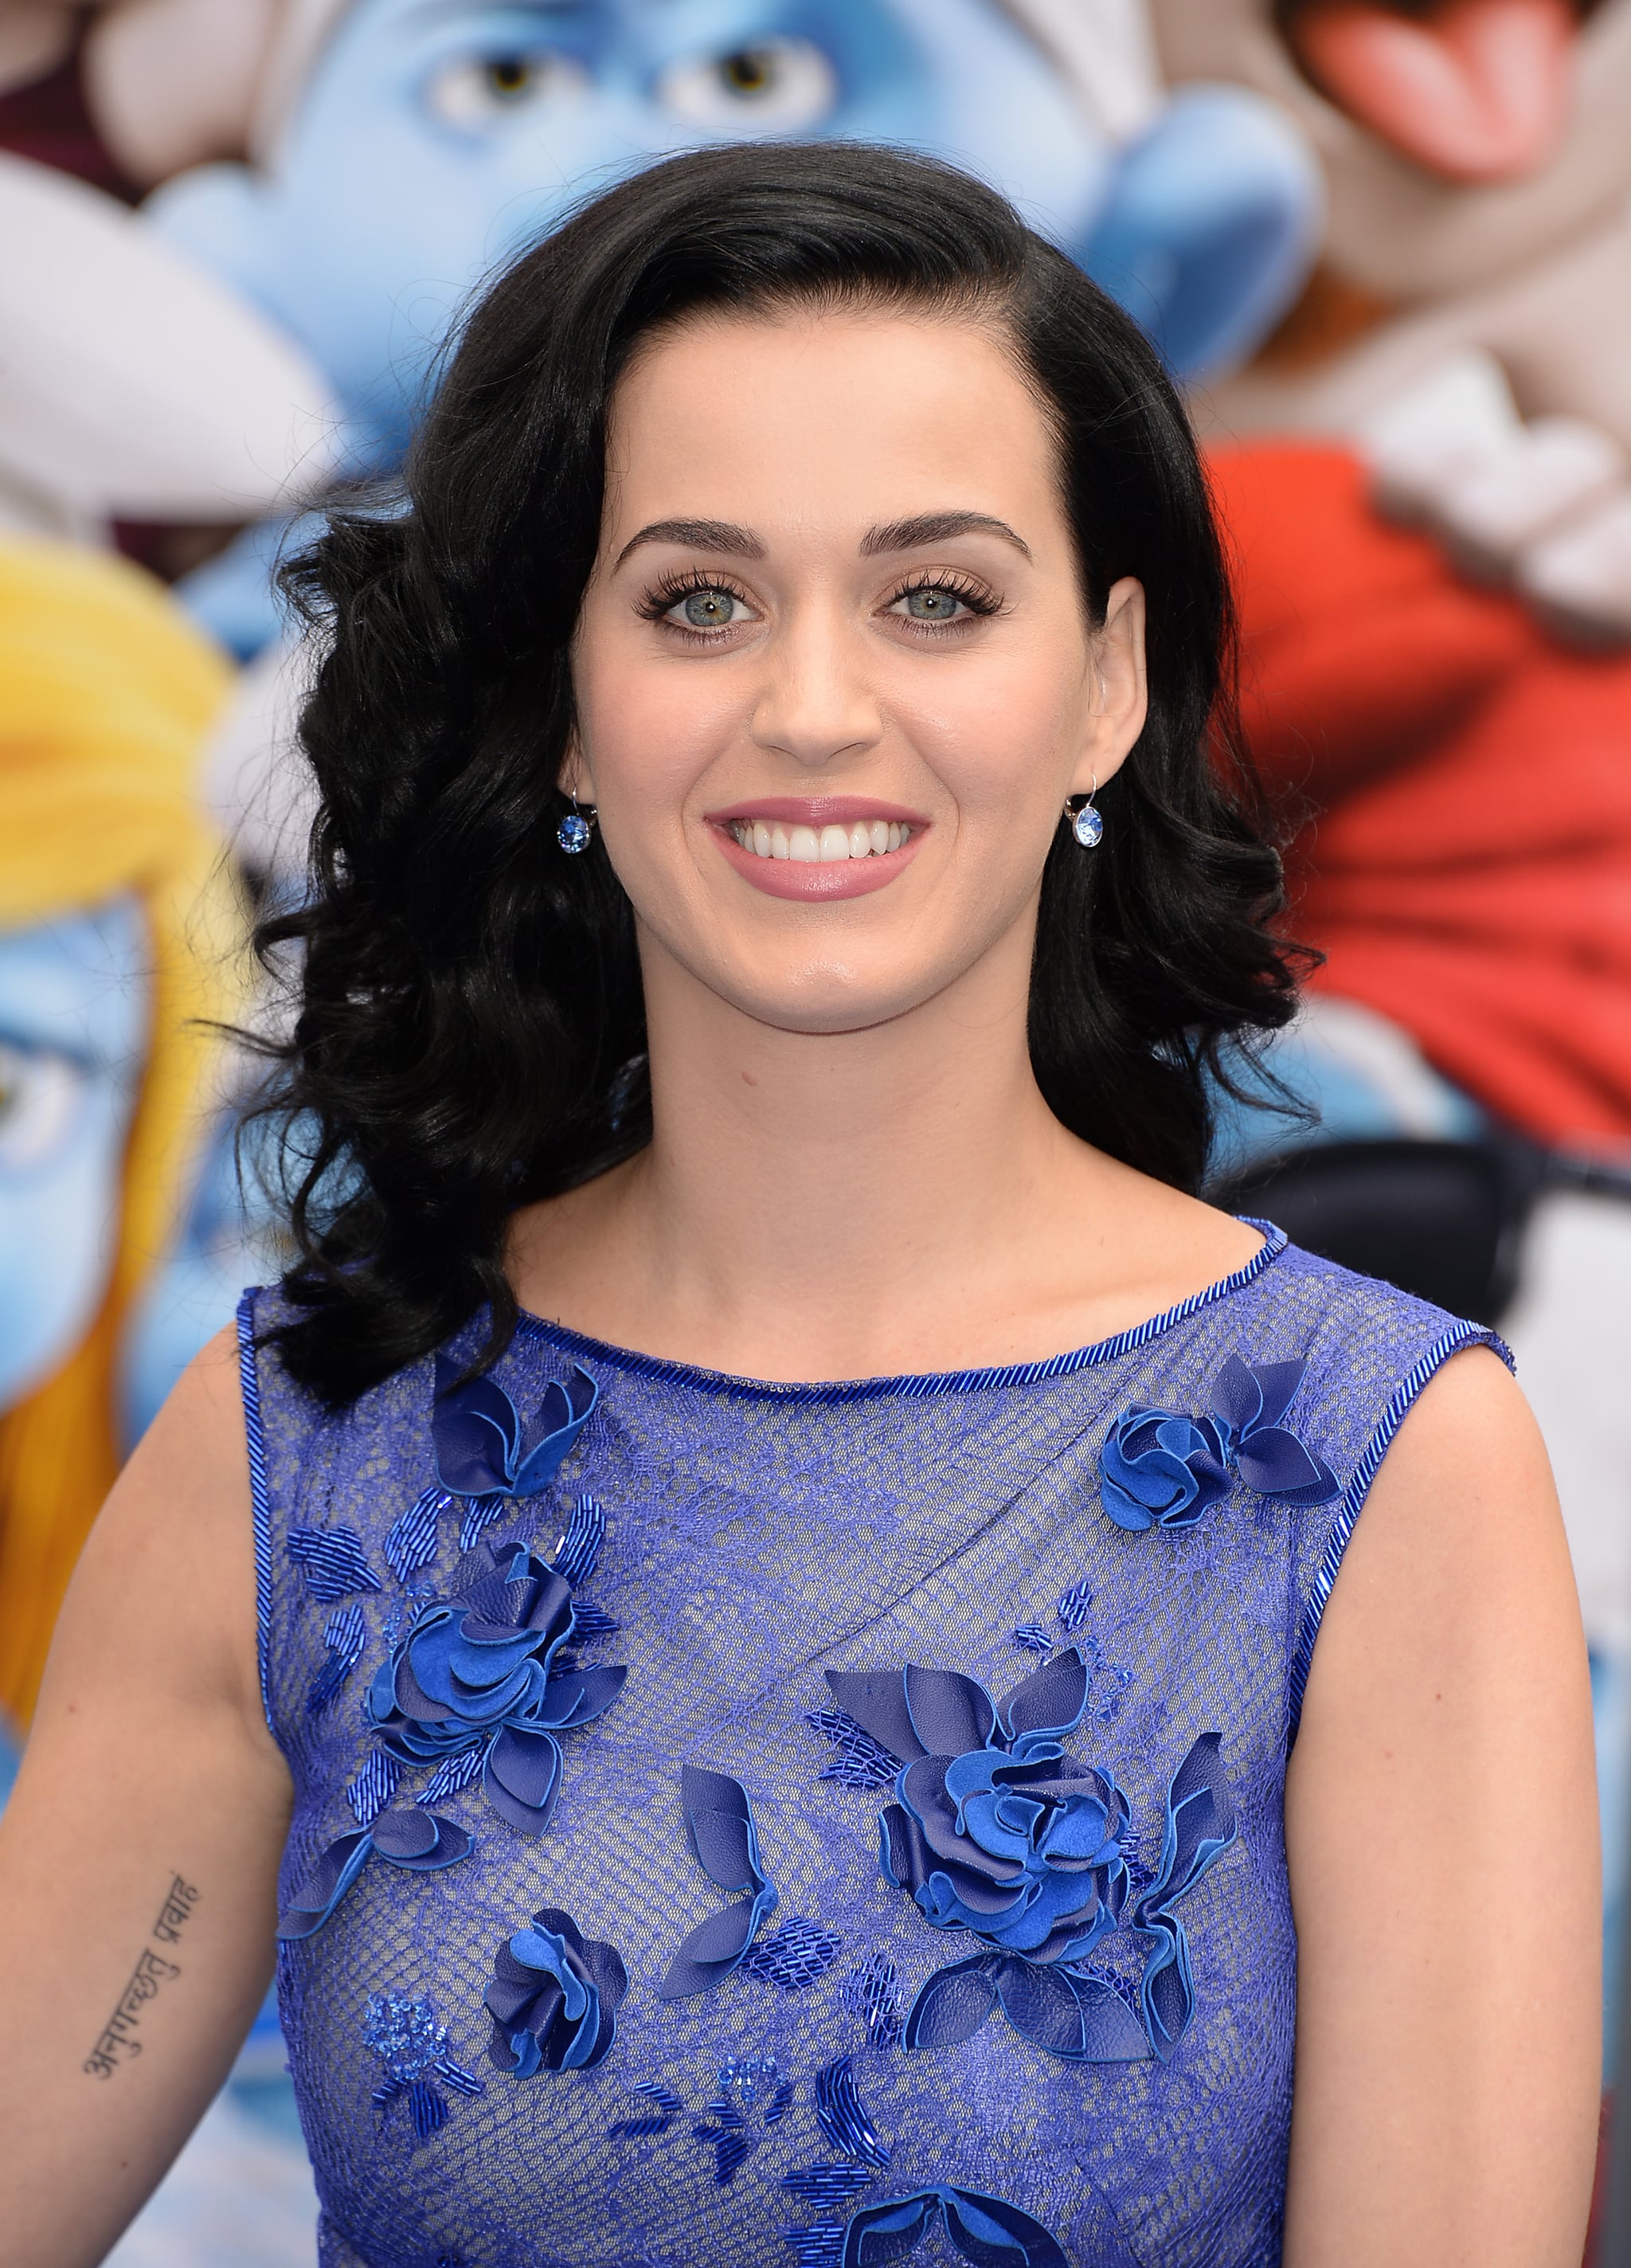 Katy Perrys Tattoos  Meanings  Steal Her Style